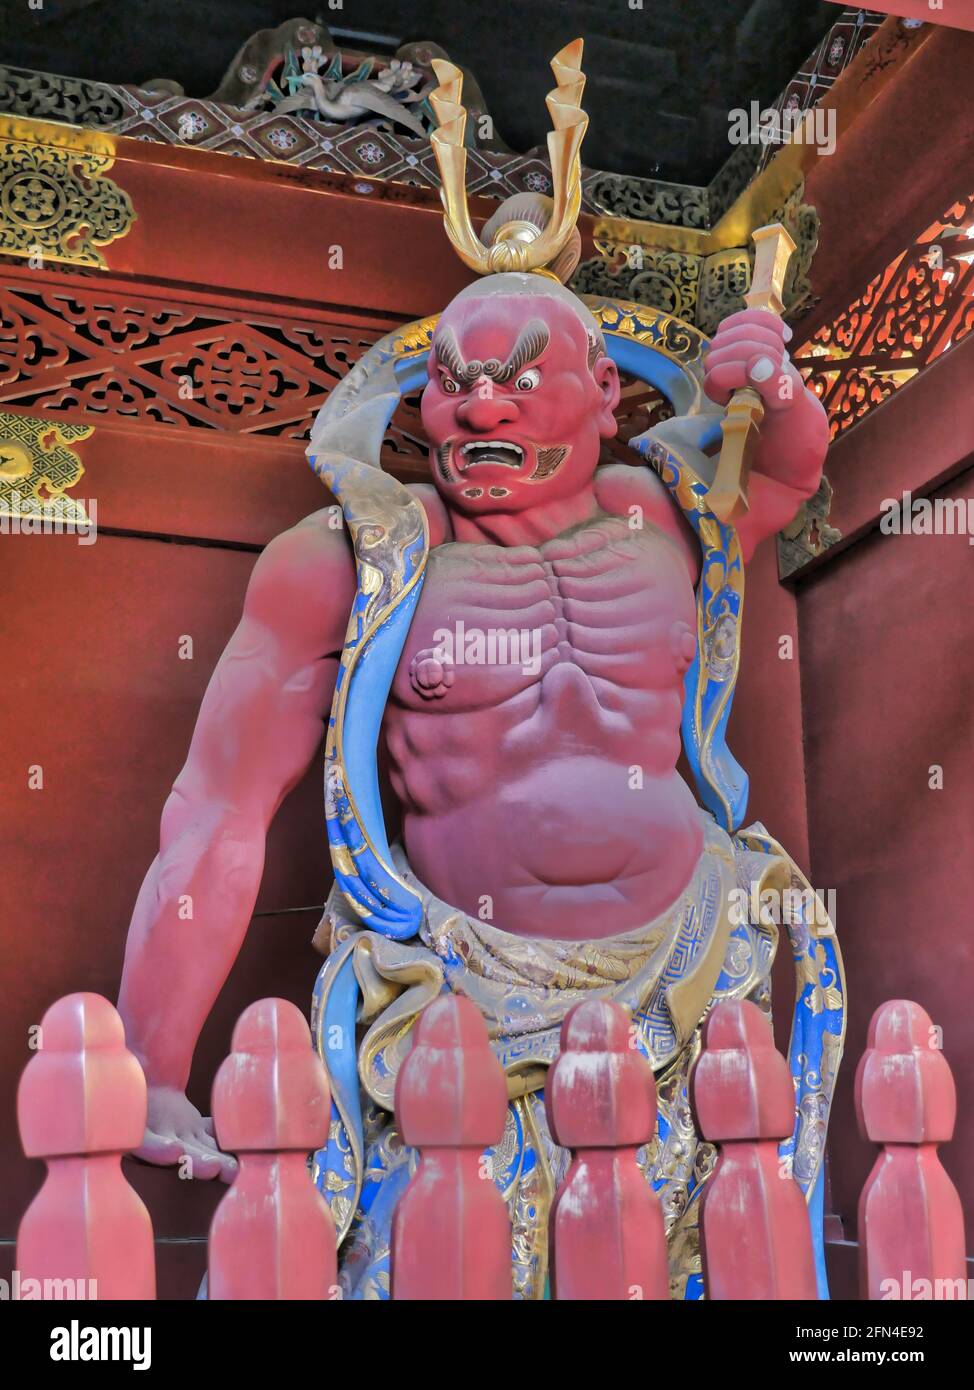 Statue of a Shinto deity in a Japanese mausoleum. Red statue of Nio, the guardian god. Buddhism, spirituality and Japanese tradition. Stock Photo